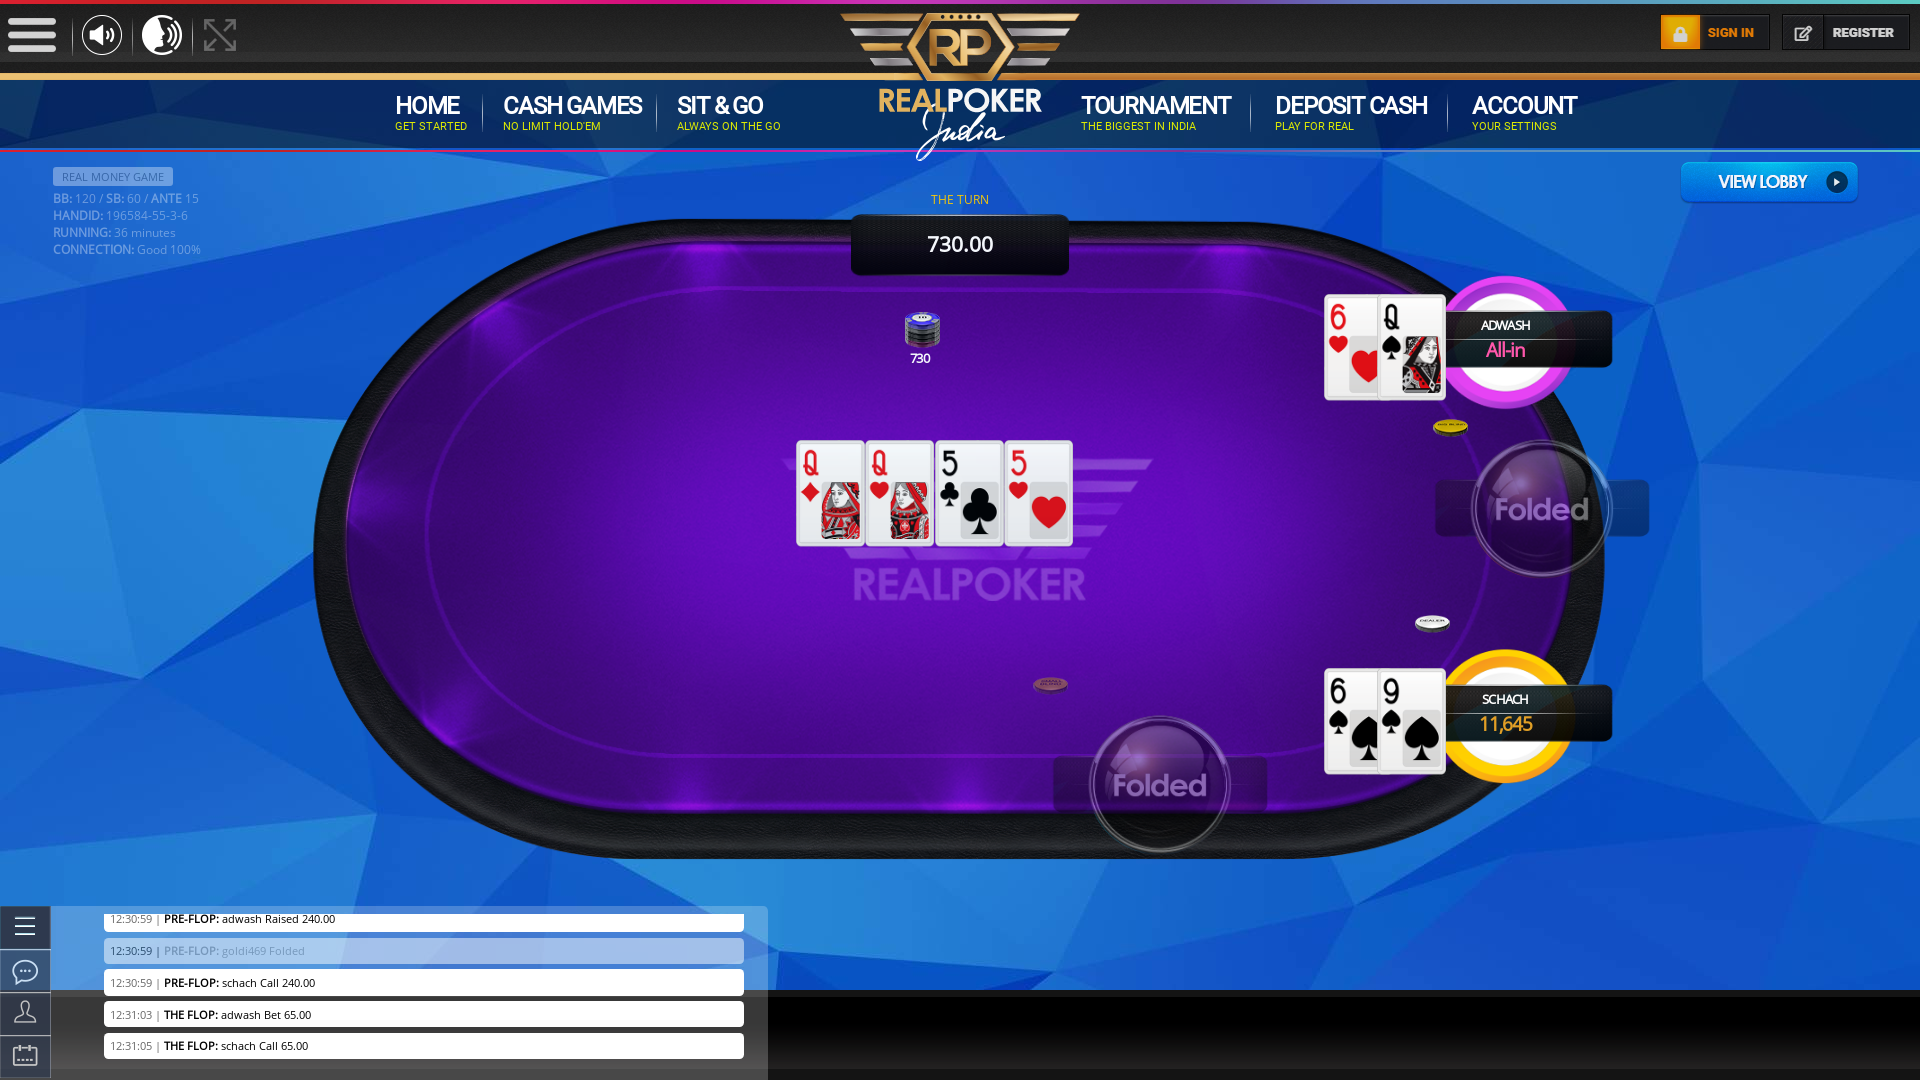 The 55th hand dealt between adwash, goldi469, capt.trips, schach,  on poker india